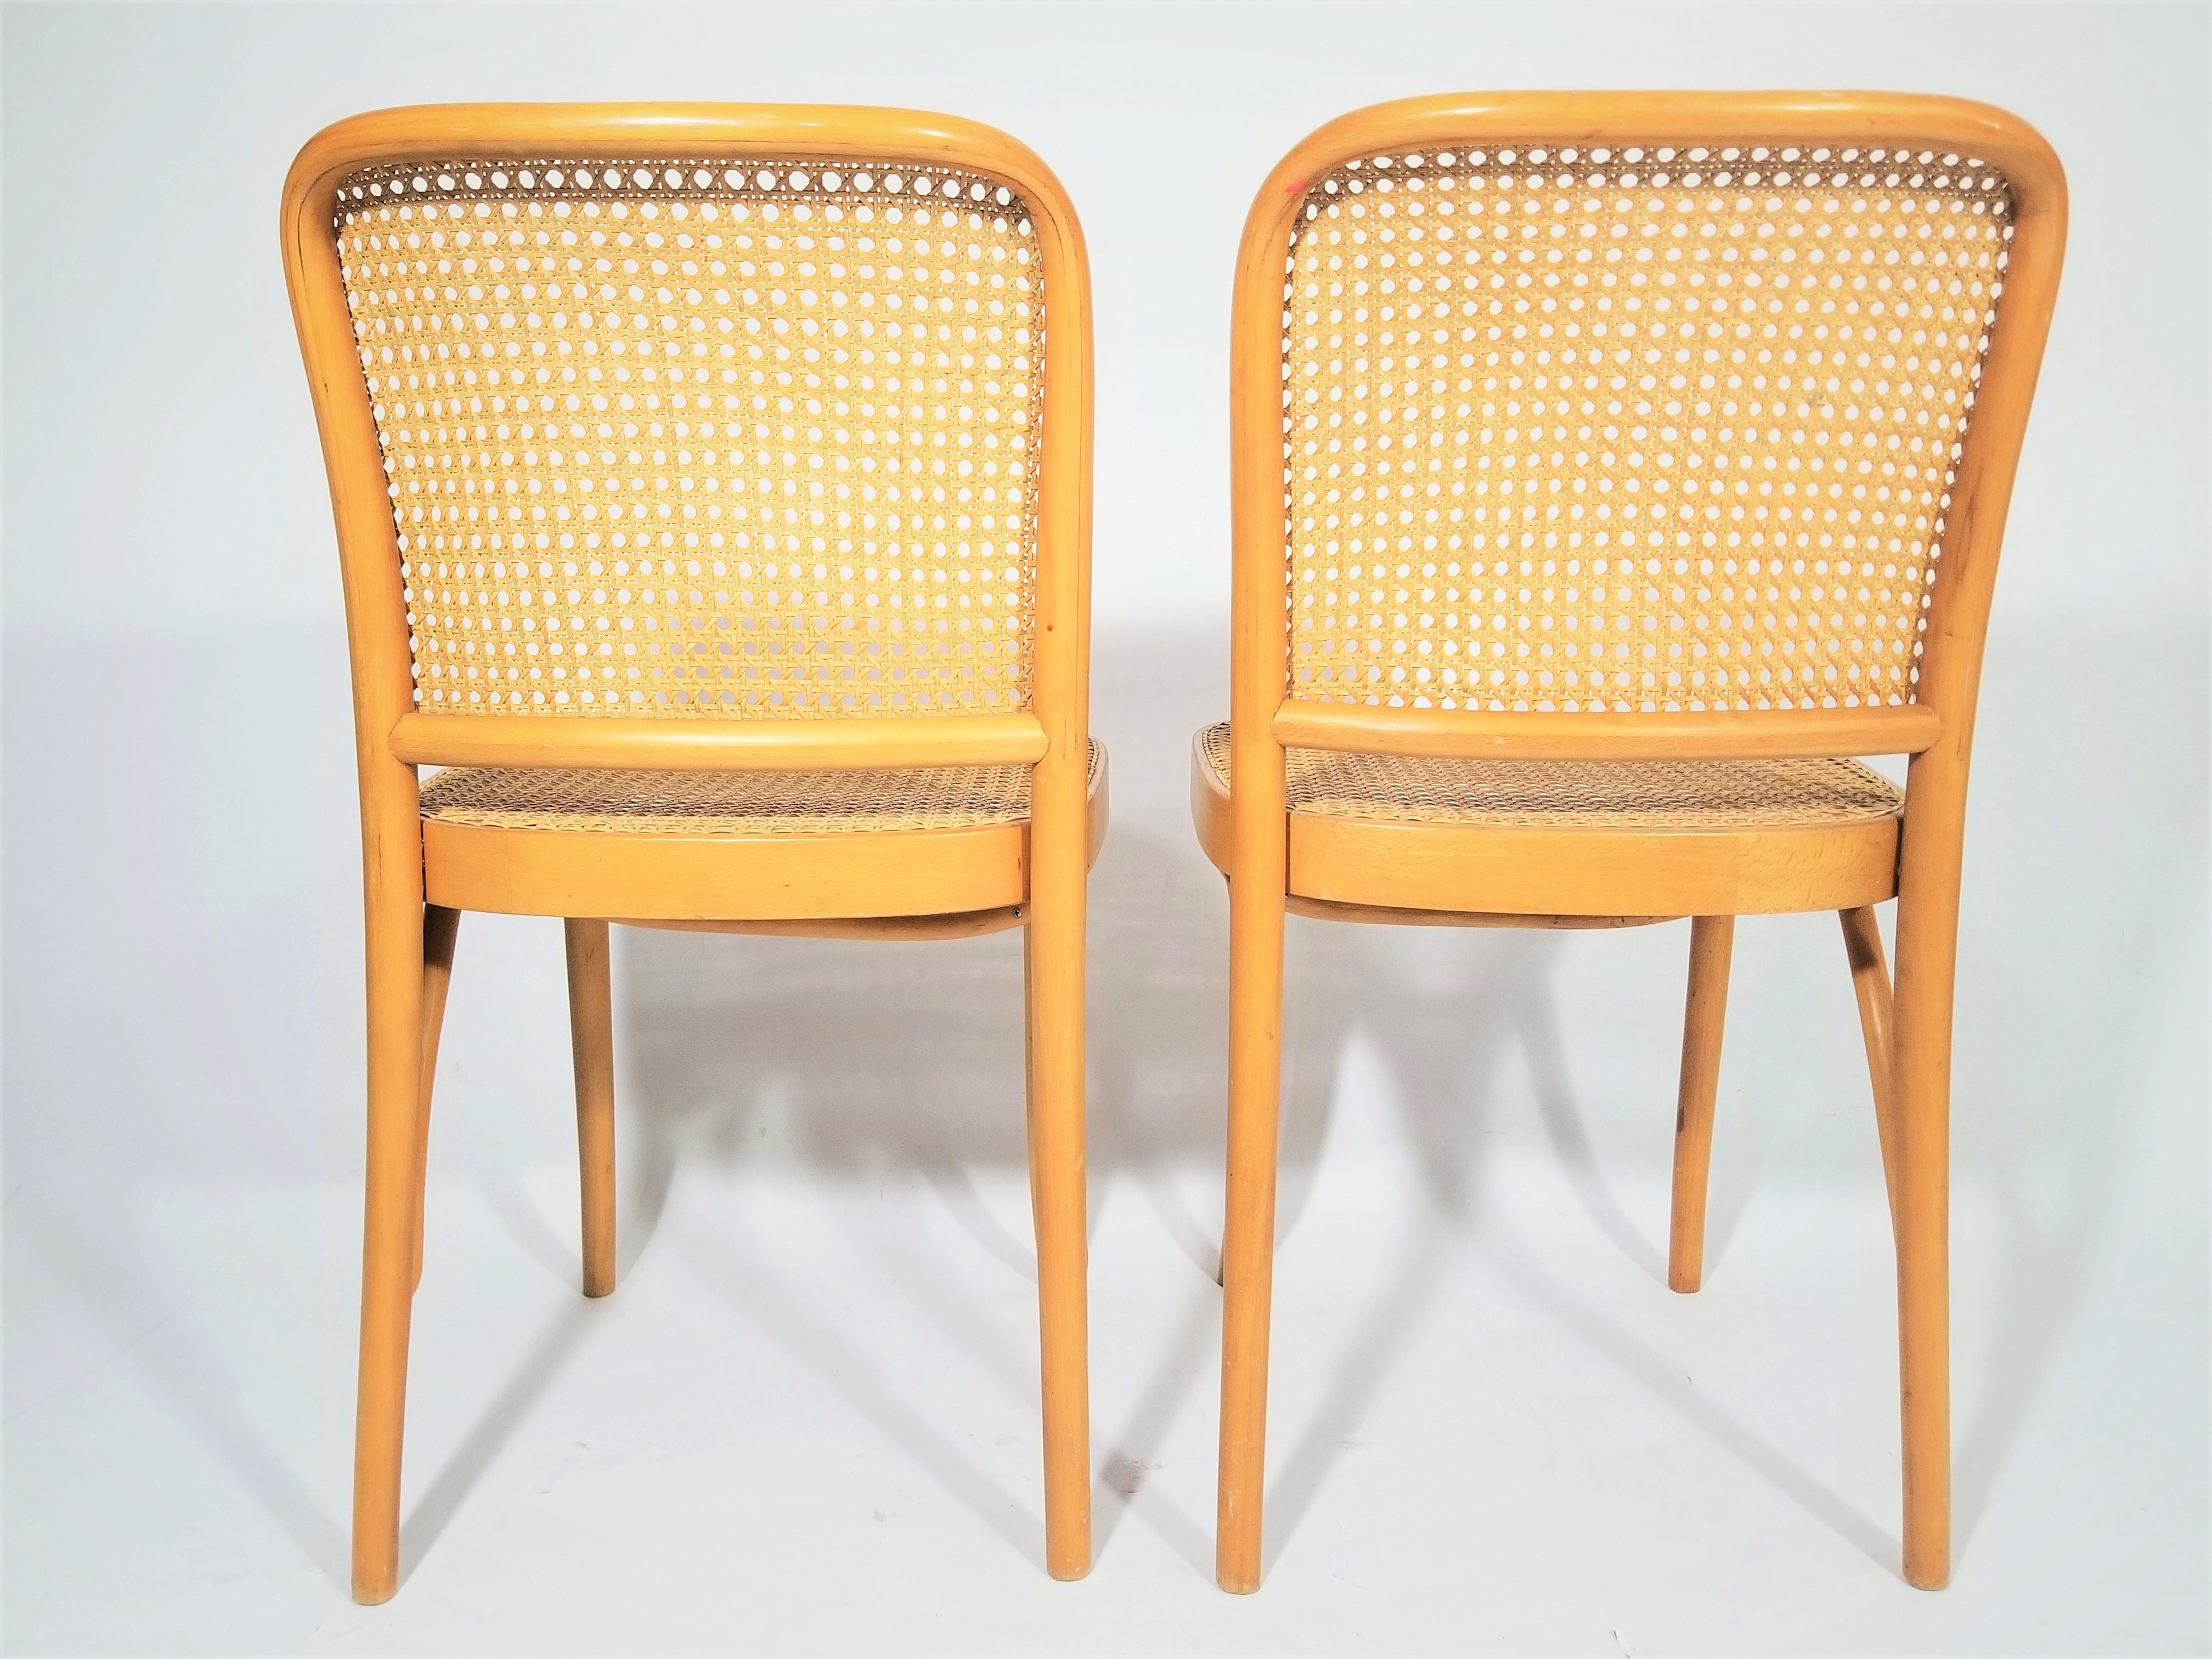 Josef Hoffmann Poland Cane Bentwood Pair of Side Chairs 3